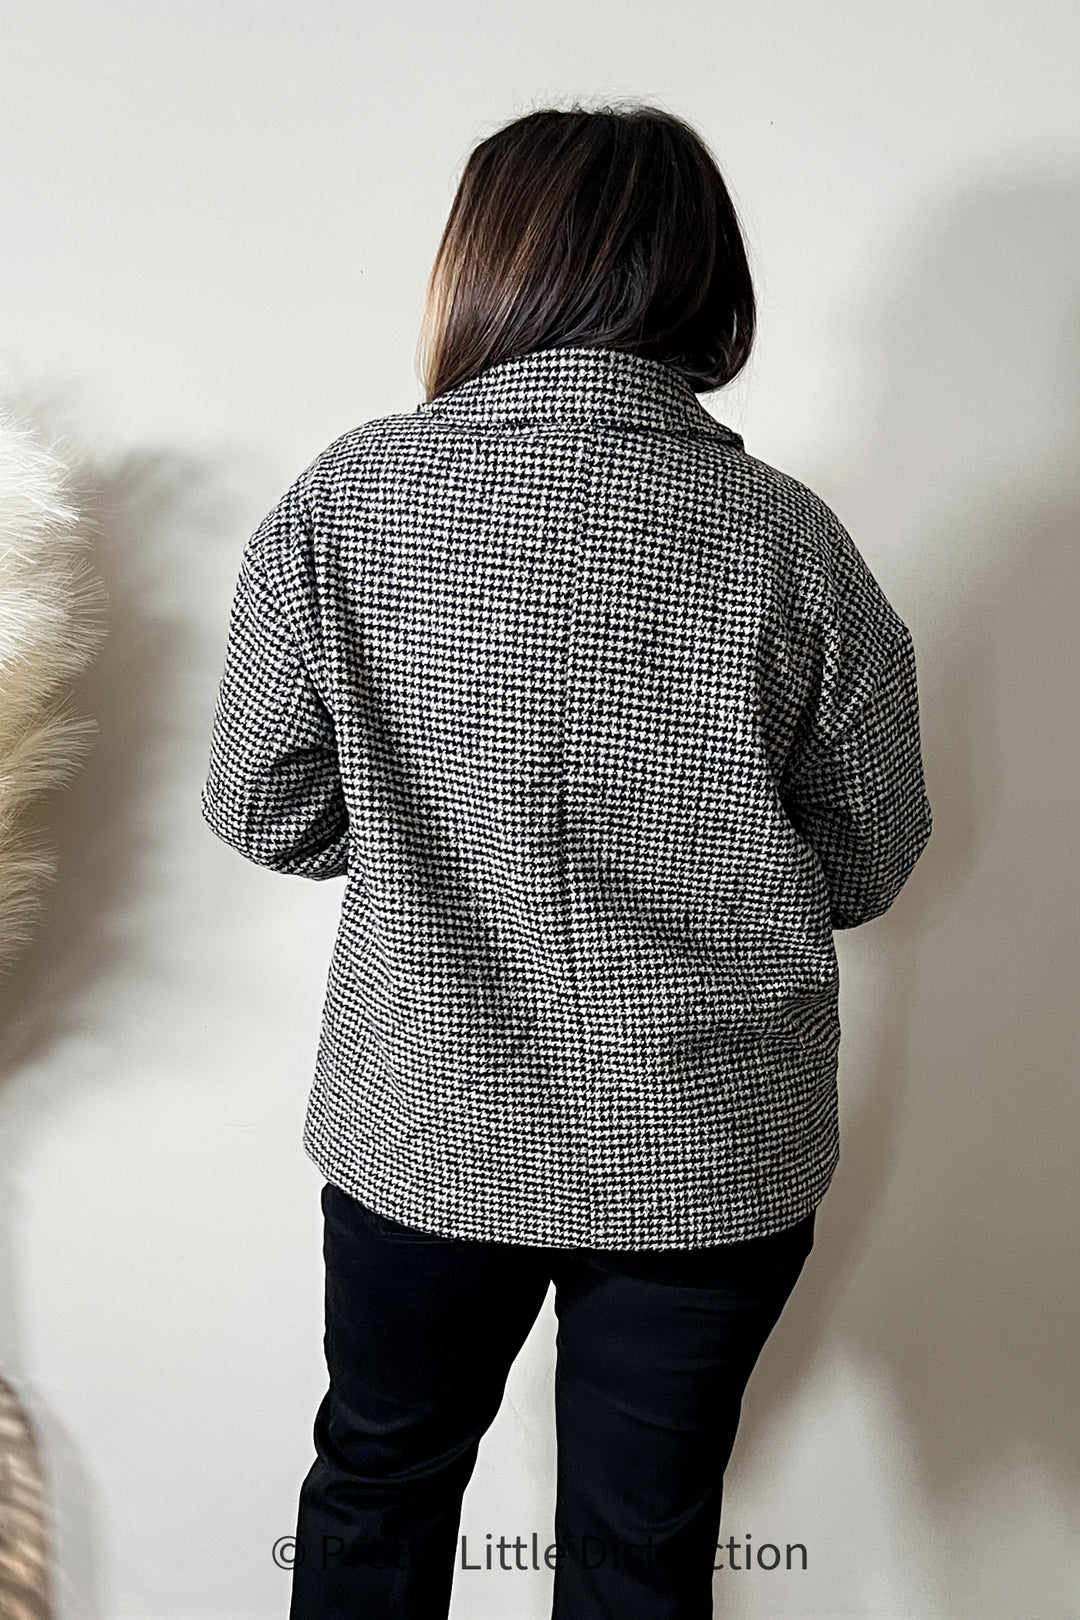 Collared Houndstooth Button Down Wool Blend Jacket